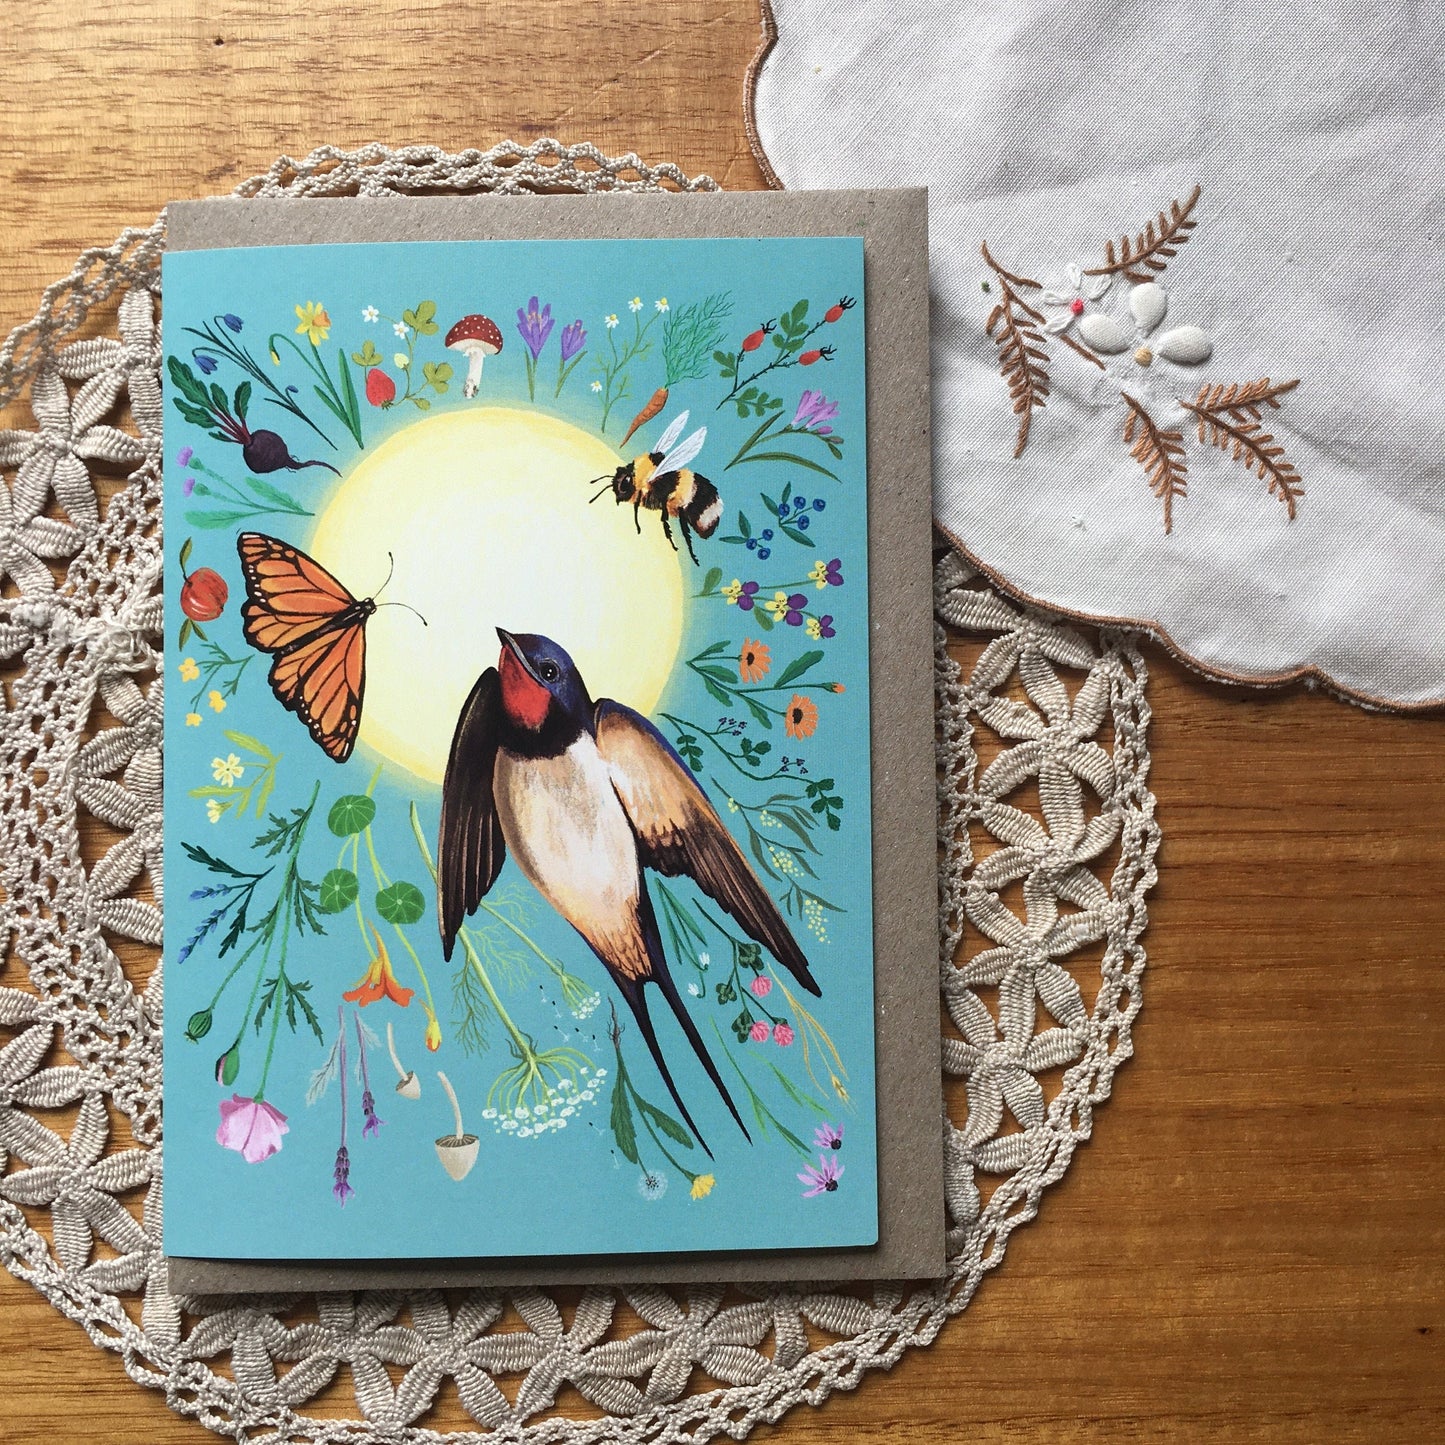 Anna Seed Art | Greeting Card - Swallow in Flight. Nature illustration